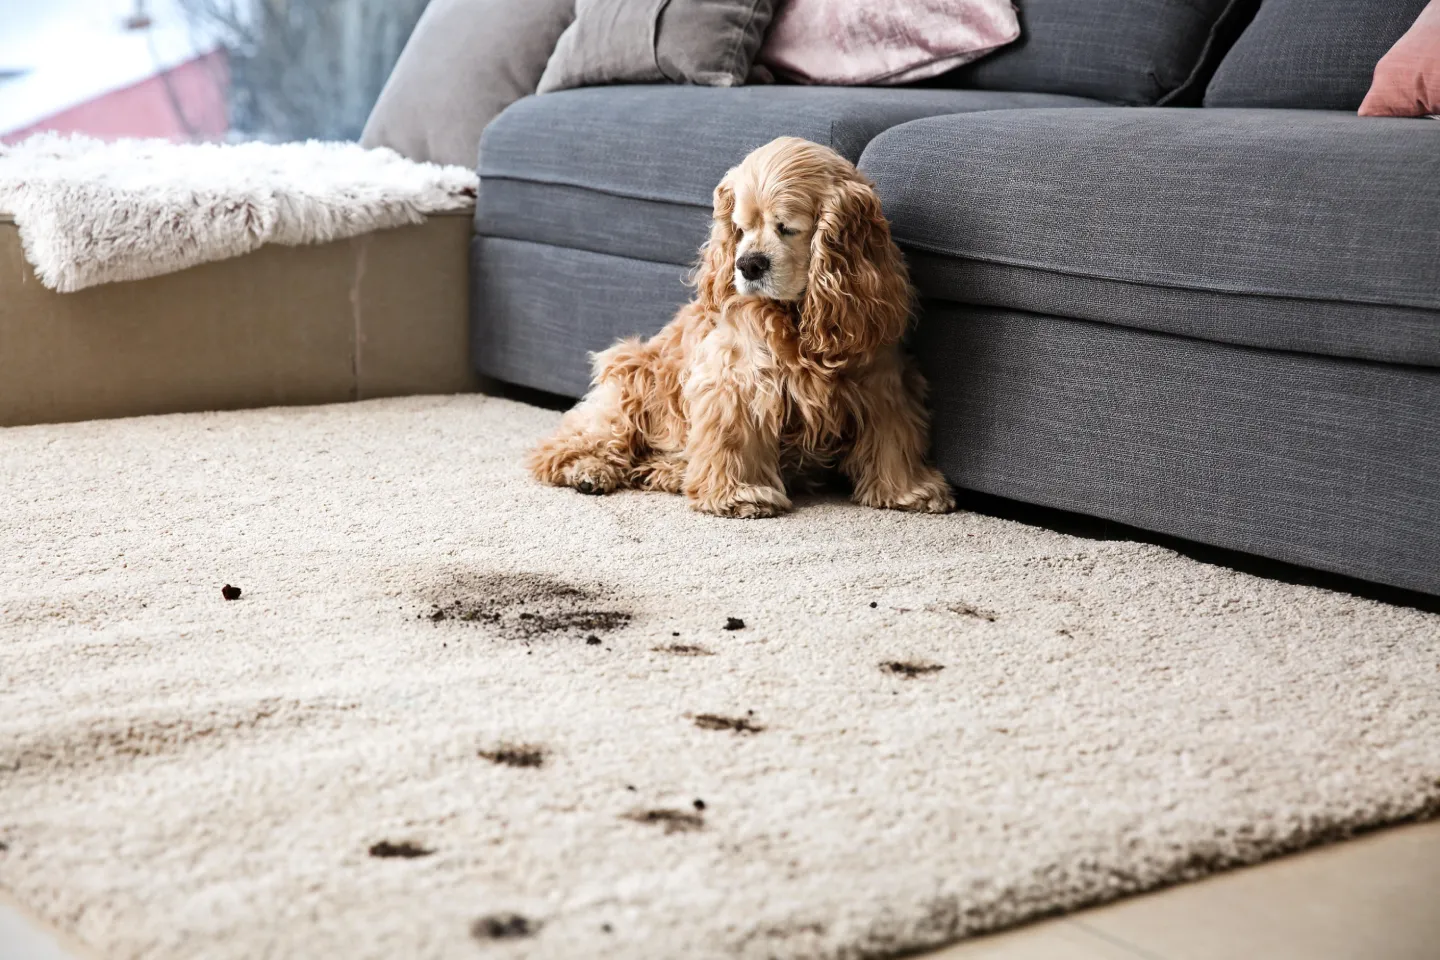 How to get brown stains out of carpet